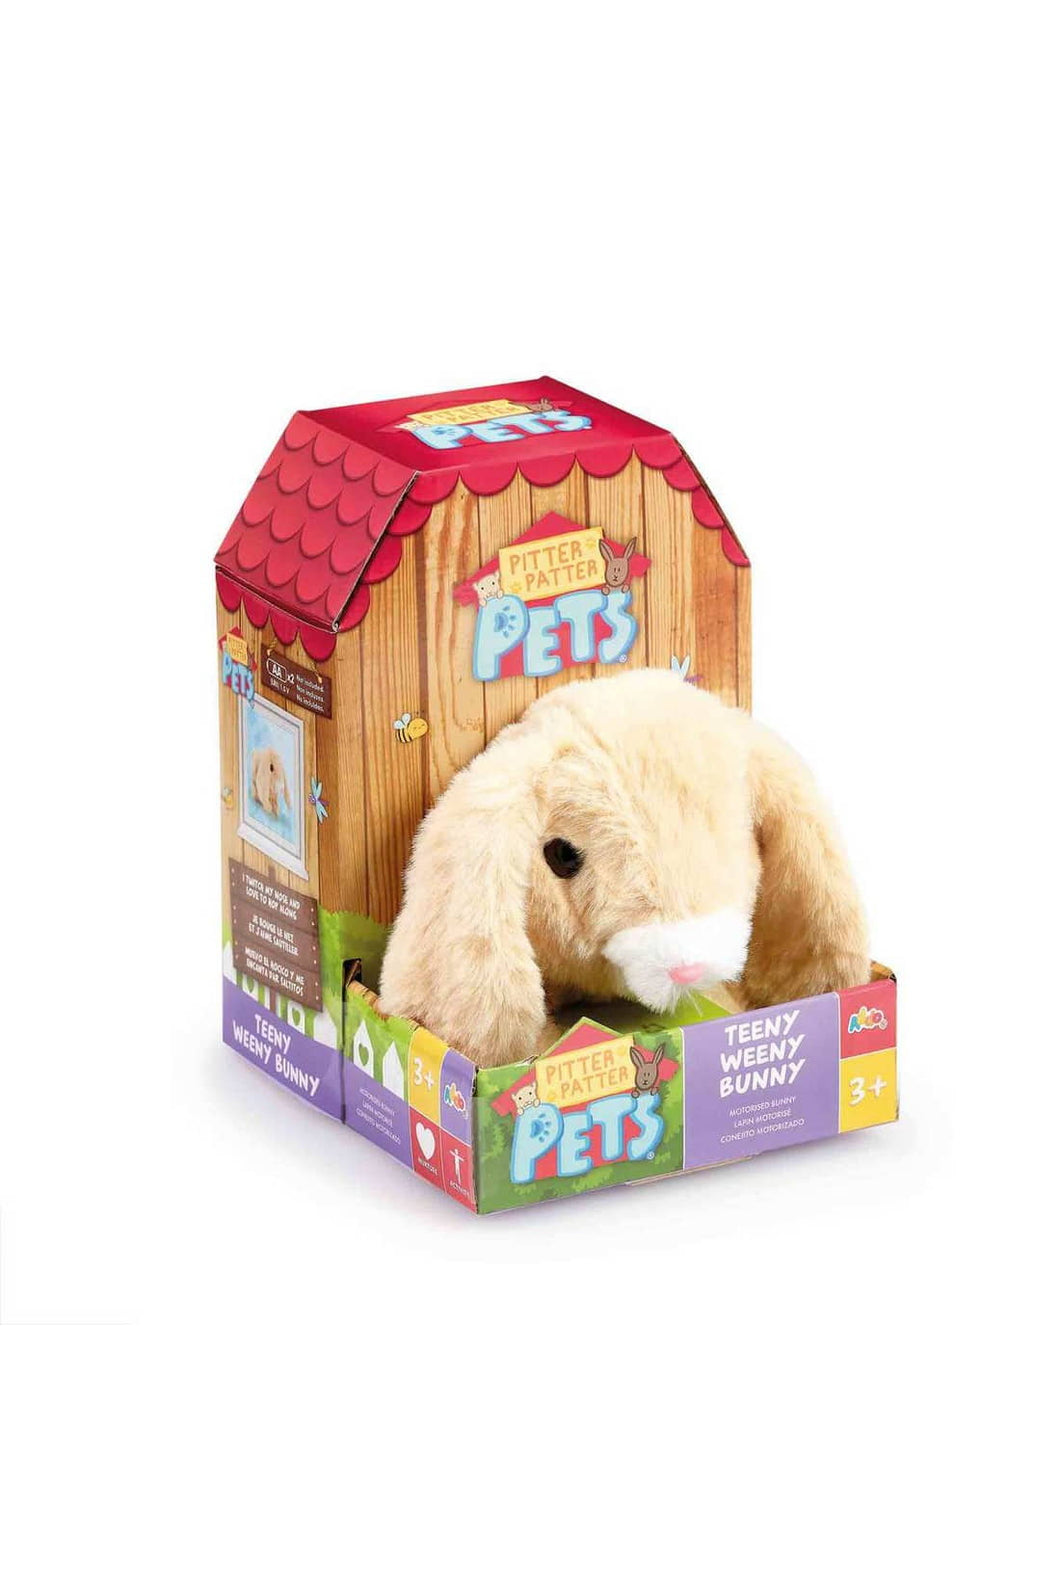 Addo Pitter Patter Pets Teeny Weeny Bunny - Floppy Eared Electronic Pet